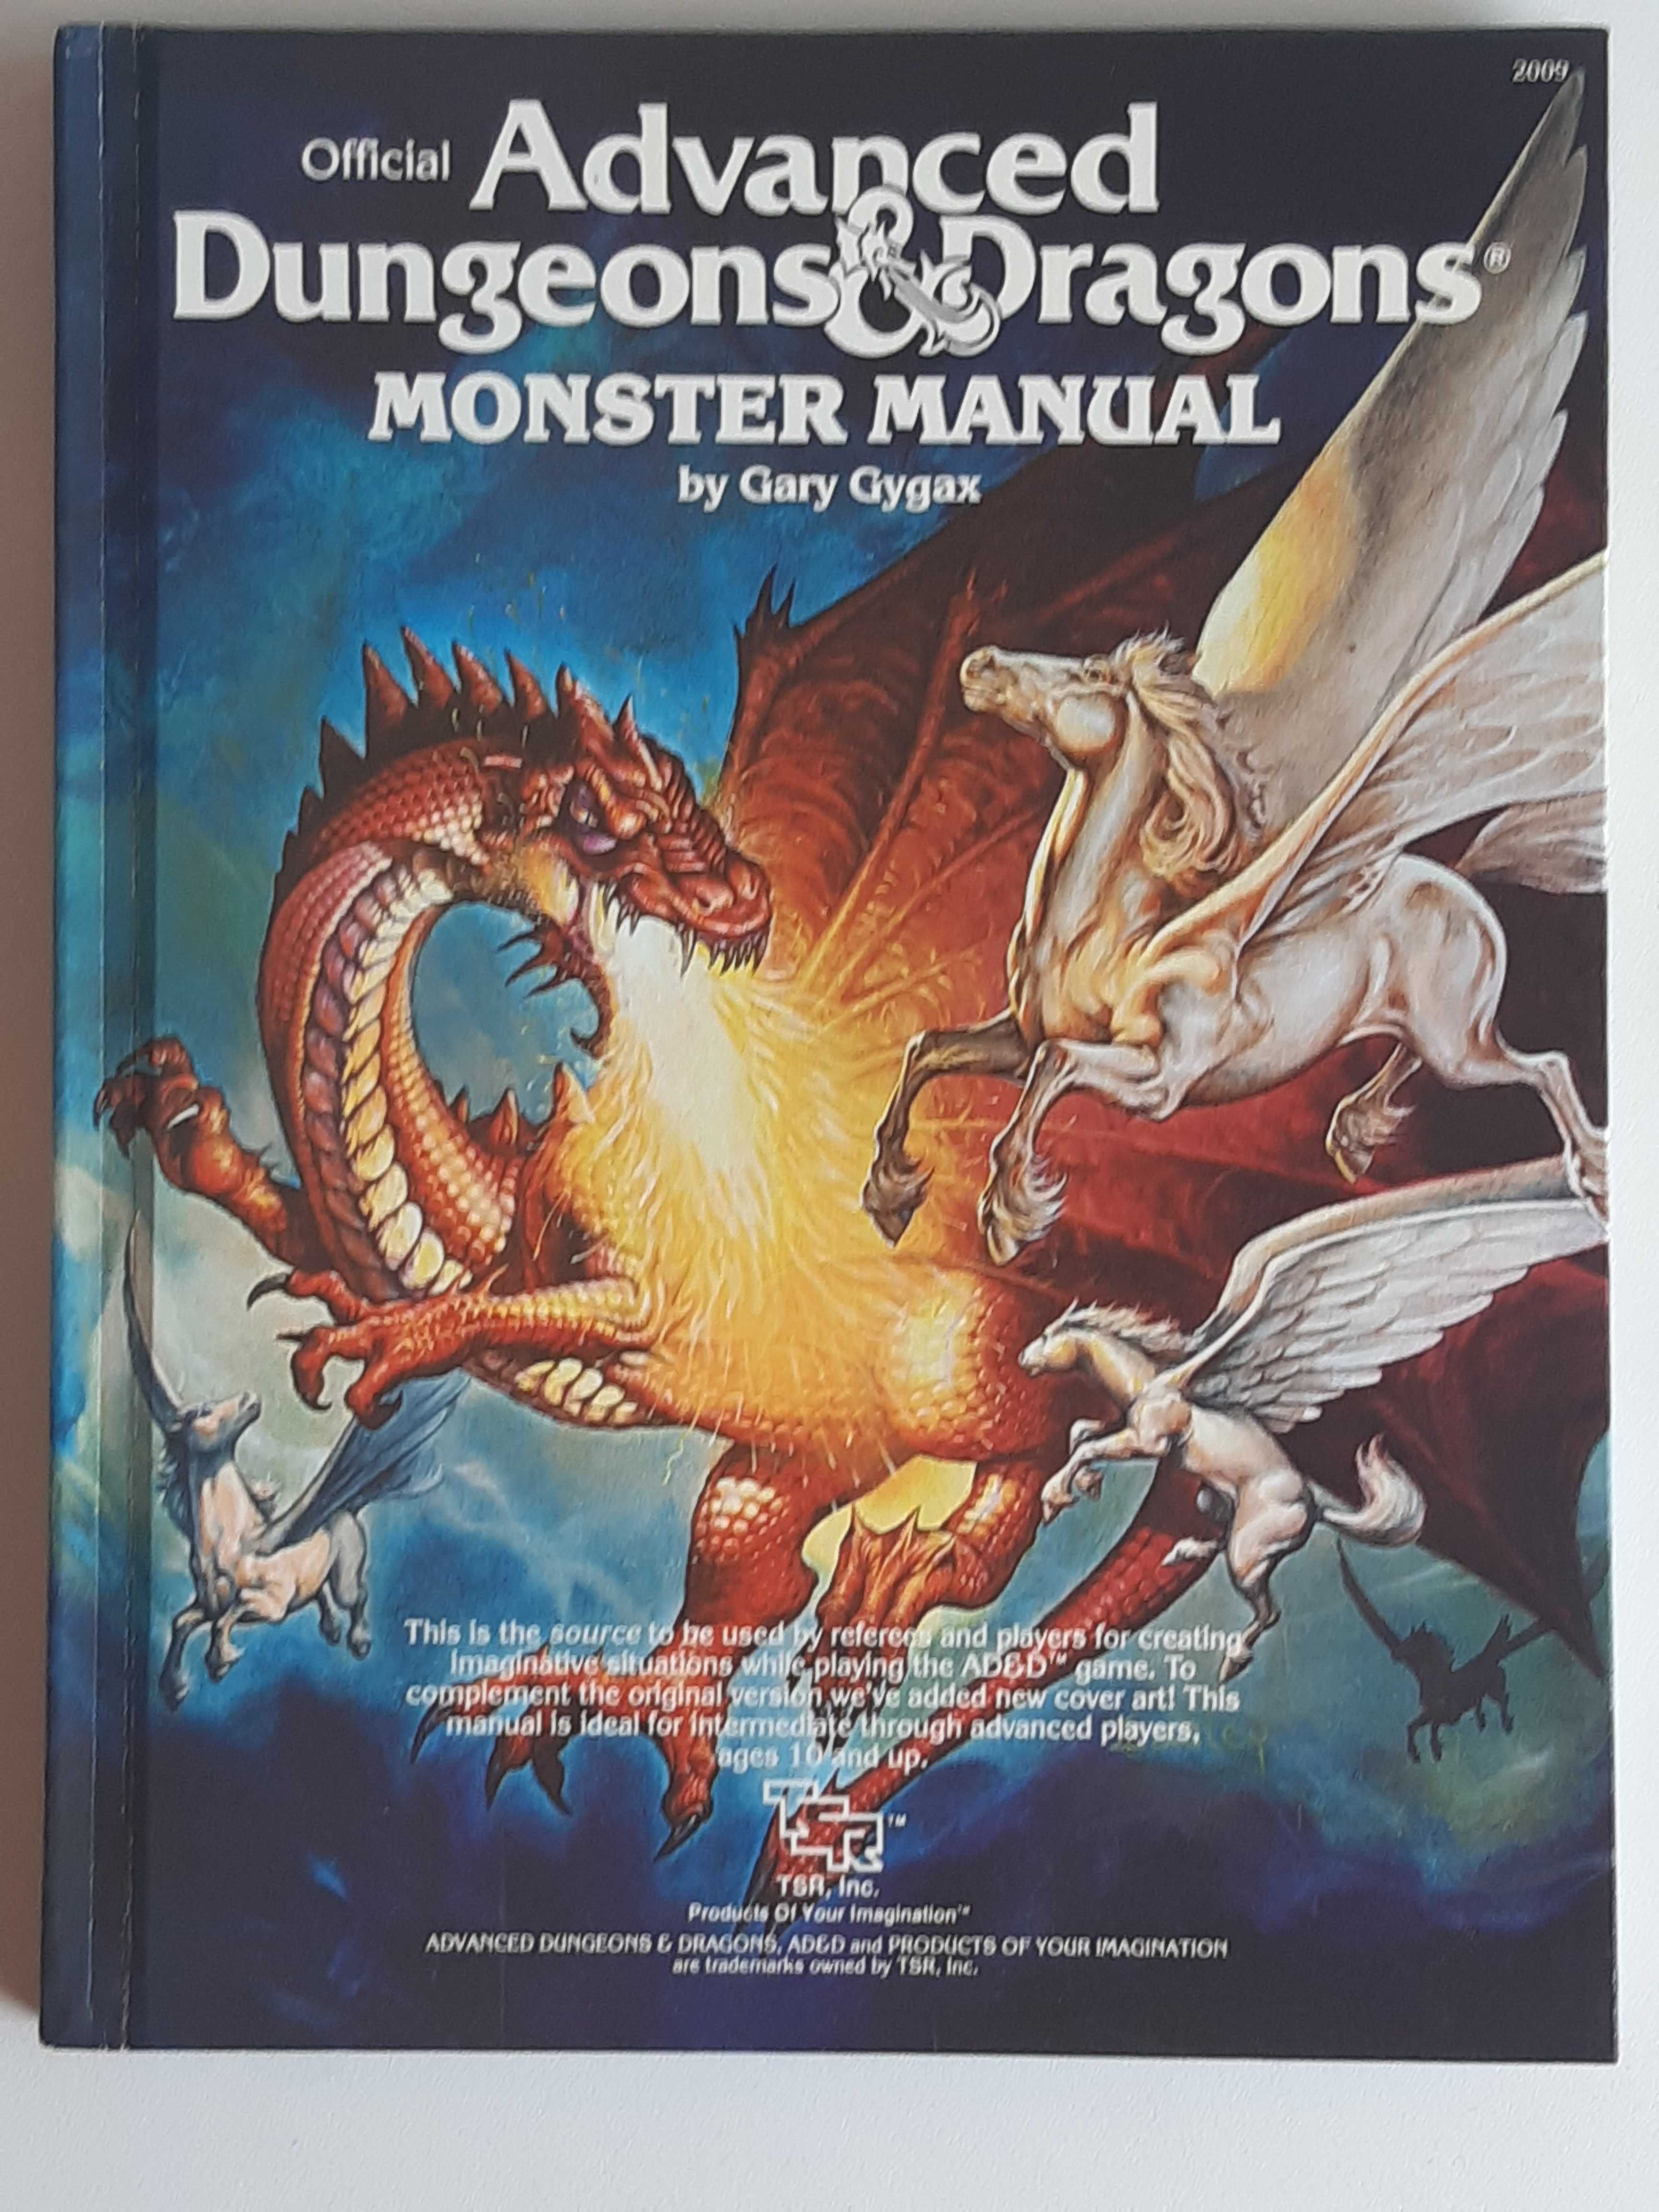 Official Advanced Dungeons& Dragons Monster Manual (1979 4th Edition)